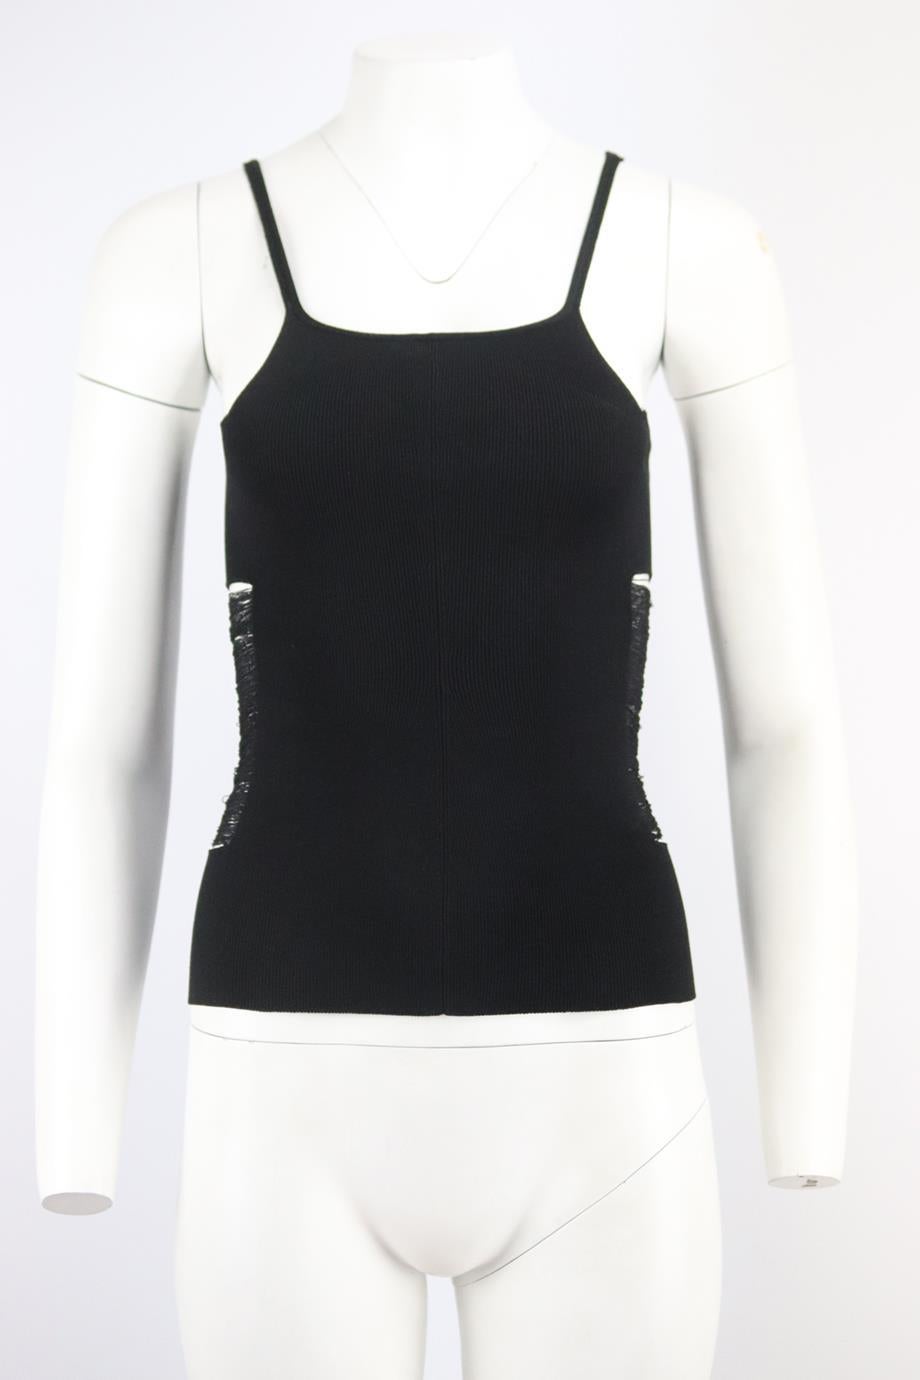 Tom Ford stretch knit top. Black. Sleeveless, crewneck. 88% Viscose, 12% polyester. Size: Small (UK 8, US 4, FR 36, IT 40). Bust: 22 in. Waist: 22 in. Hips: 23 in. Length: 20 in. Very good condition - No sign of wear; see pictures.
